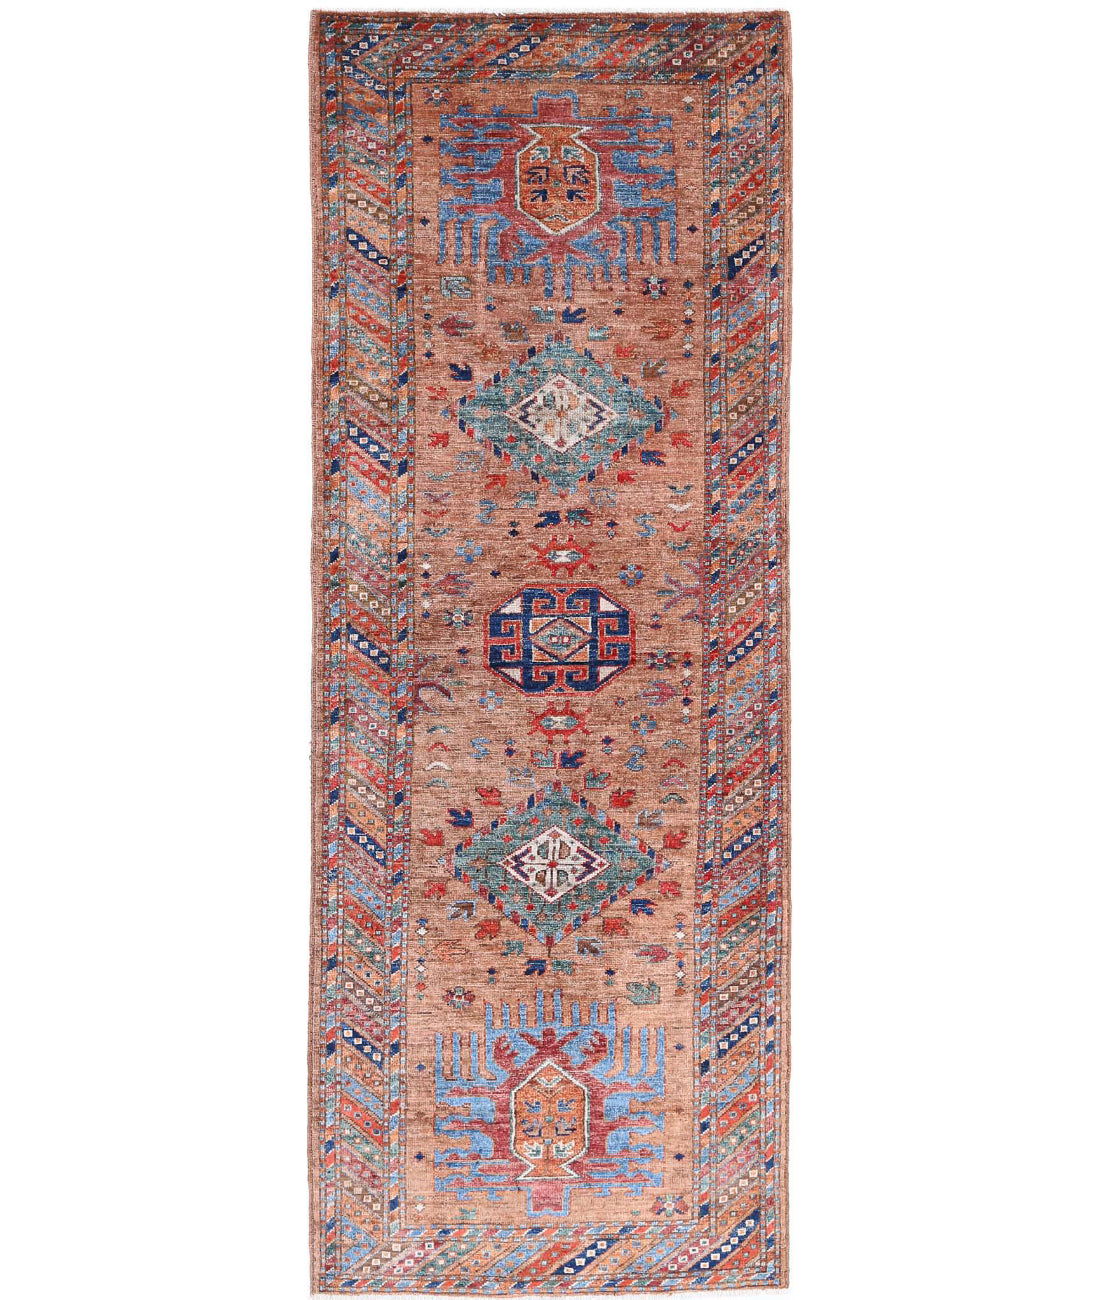 Hand Knotted Nomadic Caucasian Humna Wool Rug - 2&#39;9&#39;&#39; x 8&#39;0&#39;&#39; 2&#39;9&#39;&#39; x 8&#39;0&#39;&#39; (83 X 240) / Taupe / Multi